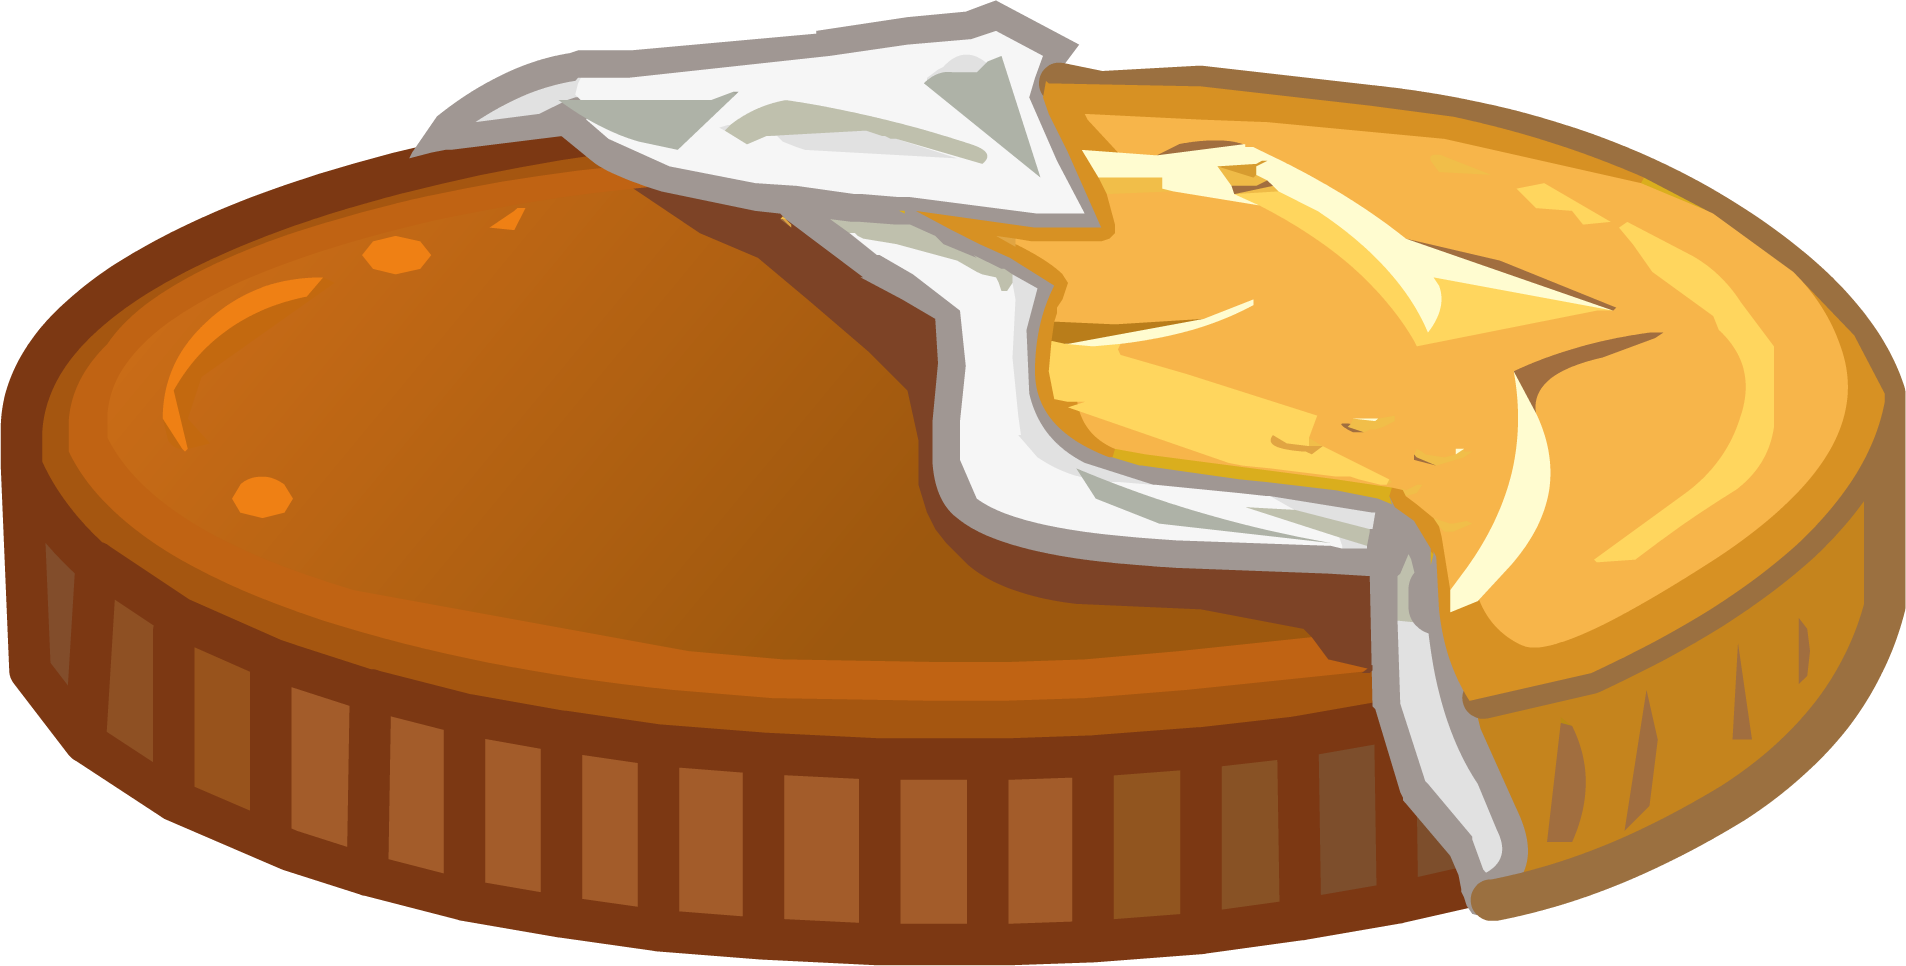 Image puffle pood icon. Coins clipart chocolate coin